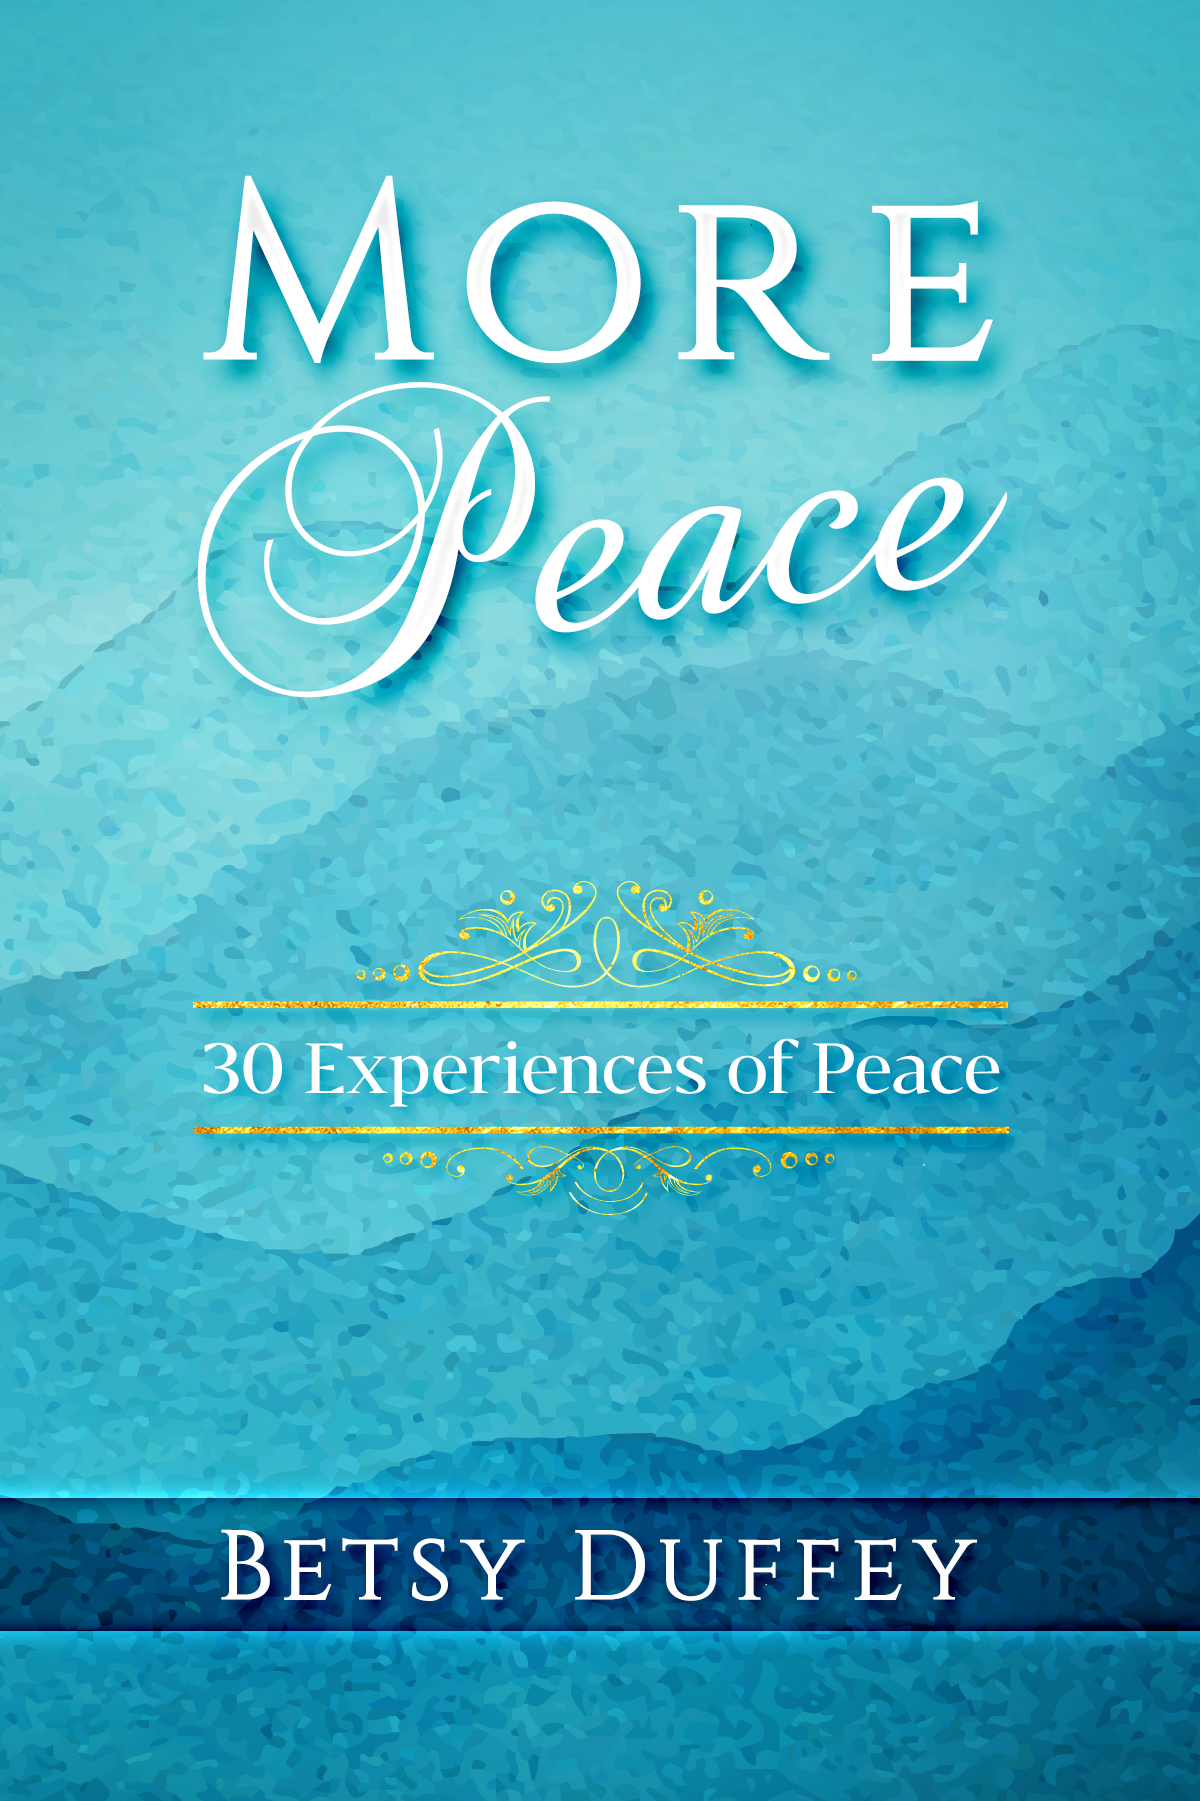 FREE: More Peace: 30 Experiences of Peace by Betsy Duffey